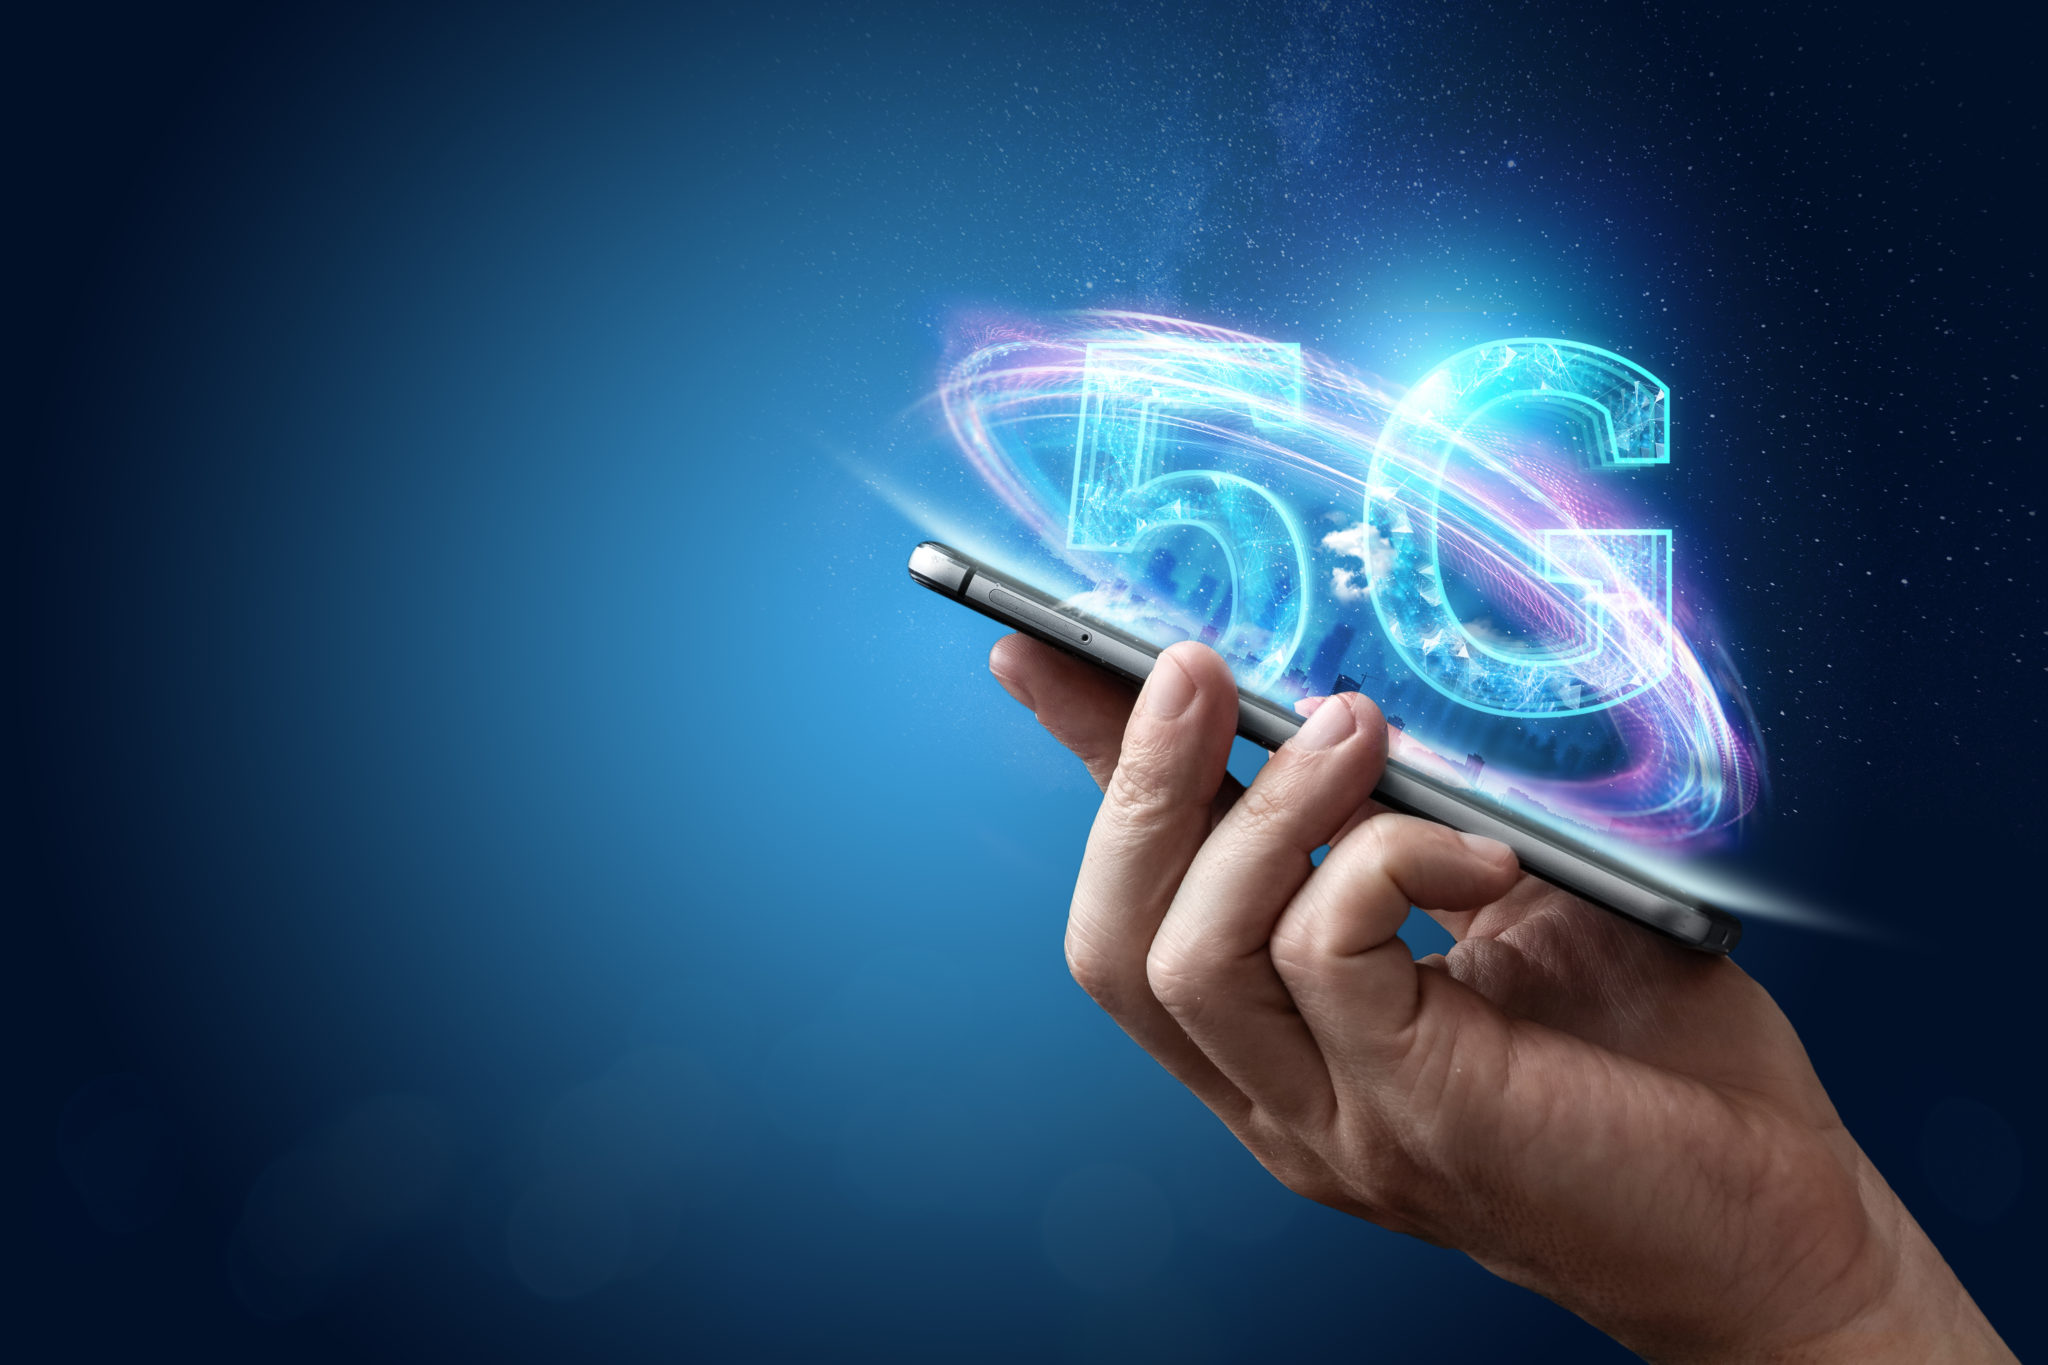 5G Coming to Nigeria sooner than expected - See details